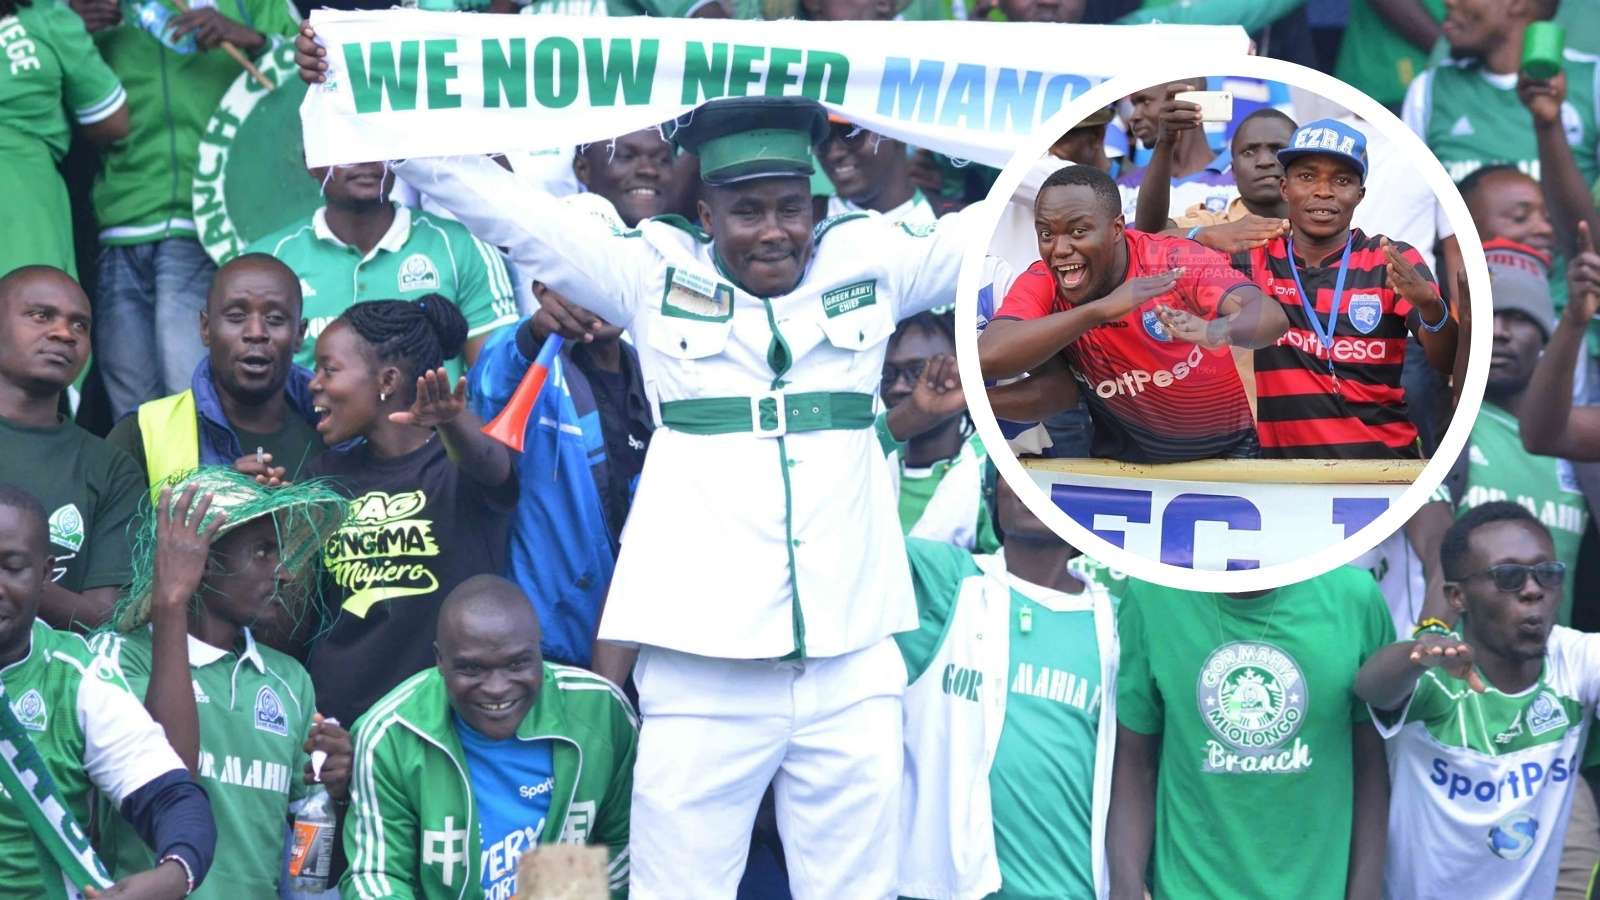 Gor Mahia and AFC Leopards fans in action.